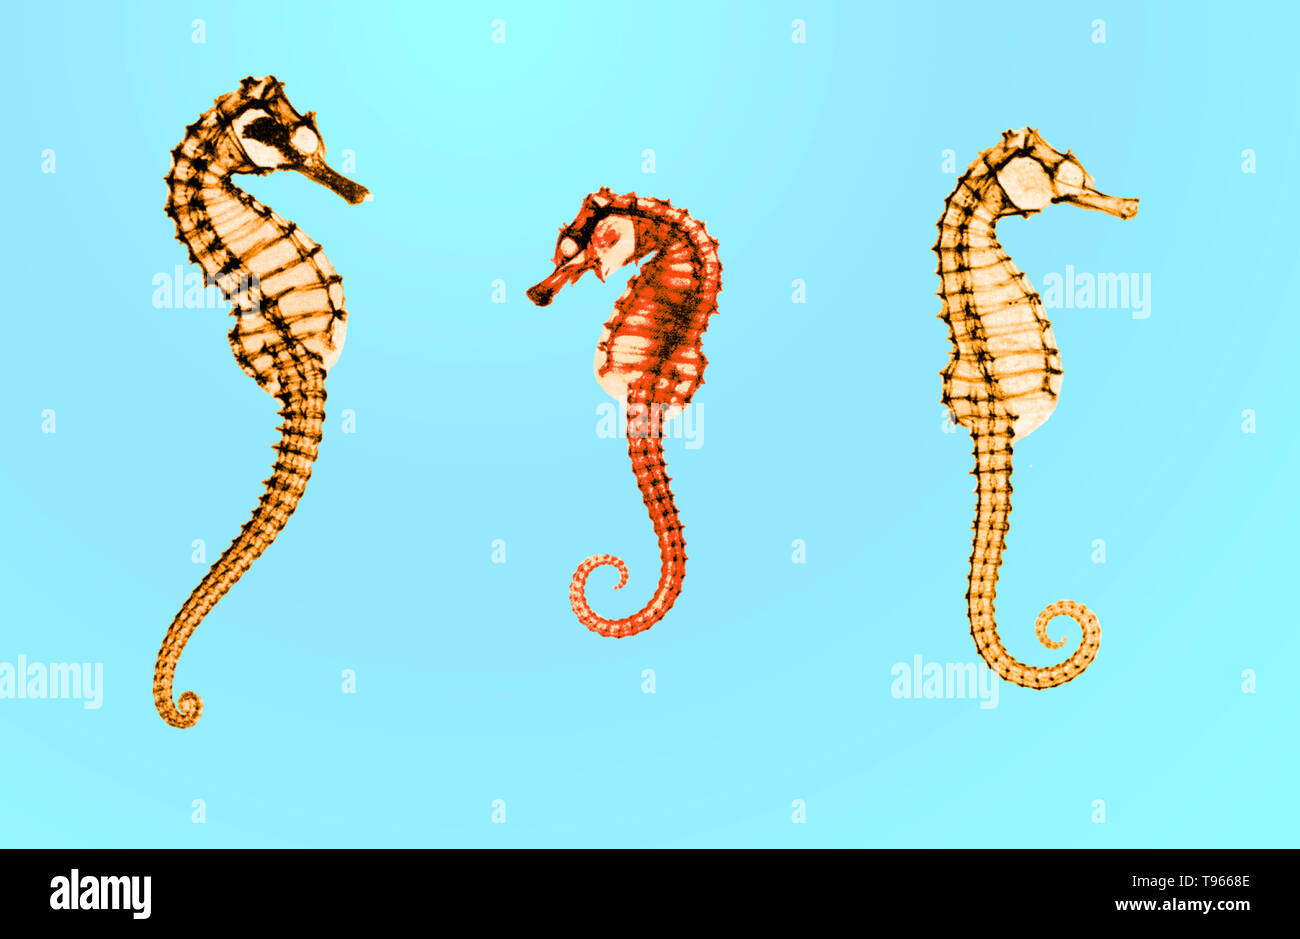 Composite image from historical x-rays of seahorses (Hippocampus sp.) made by E. C. le Grice. Stock Photo